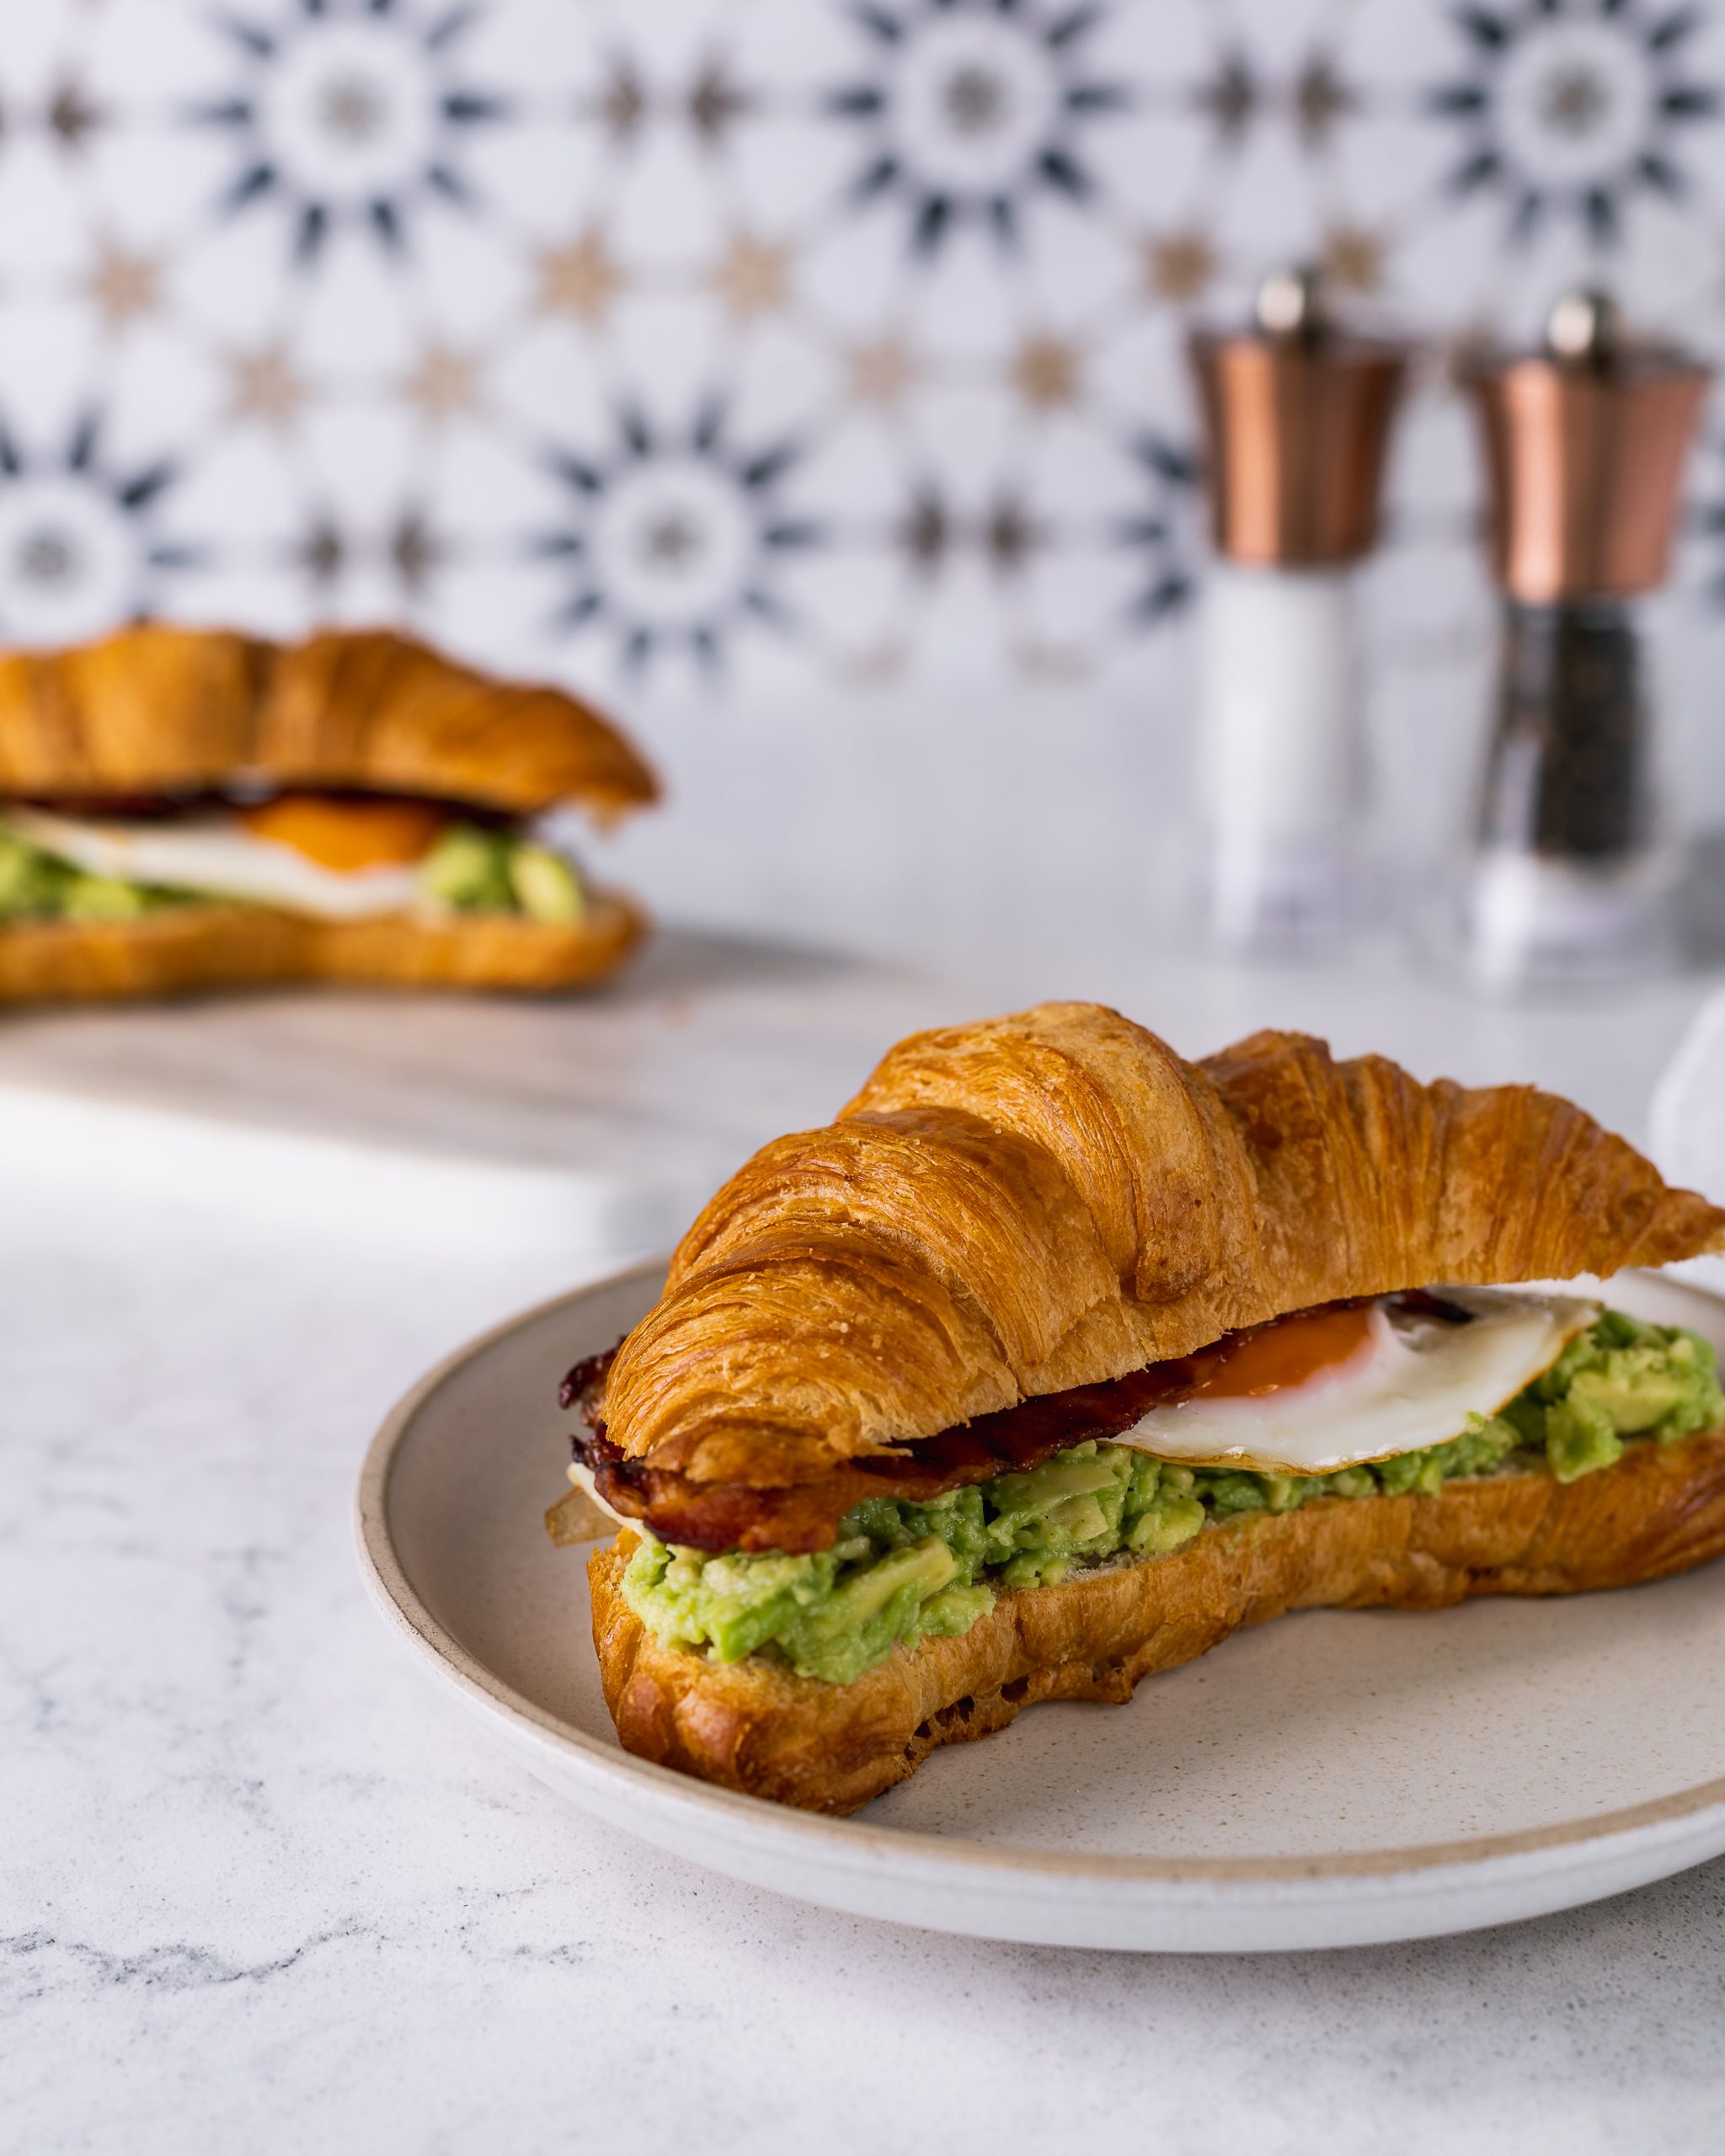 The ultimate brunch with loaded croissants. Croissant with avocado smash with a pinch of chilli flakes, rich fried egg with crispy bacon.